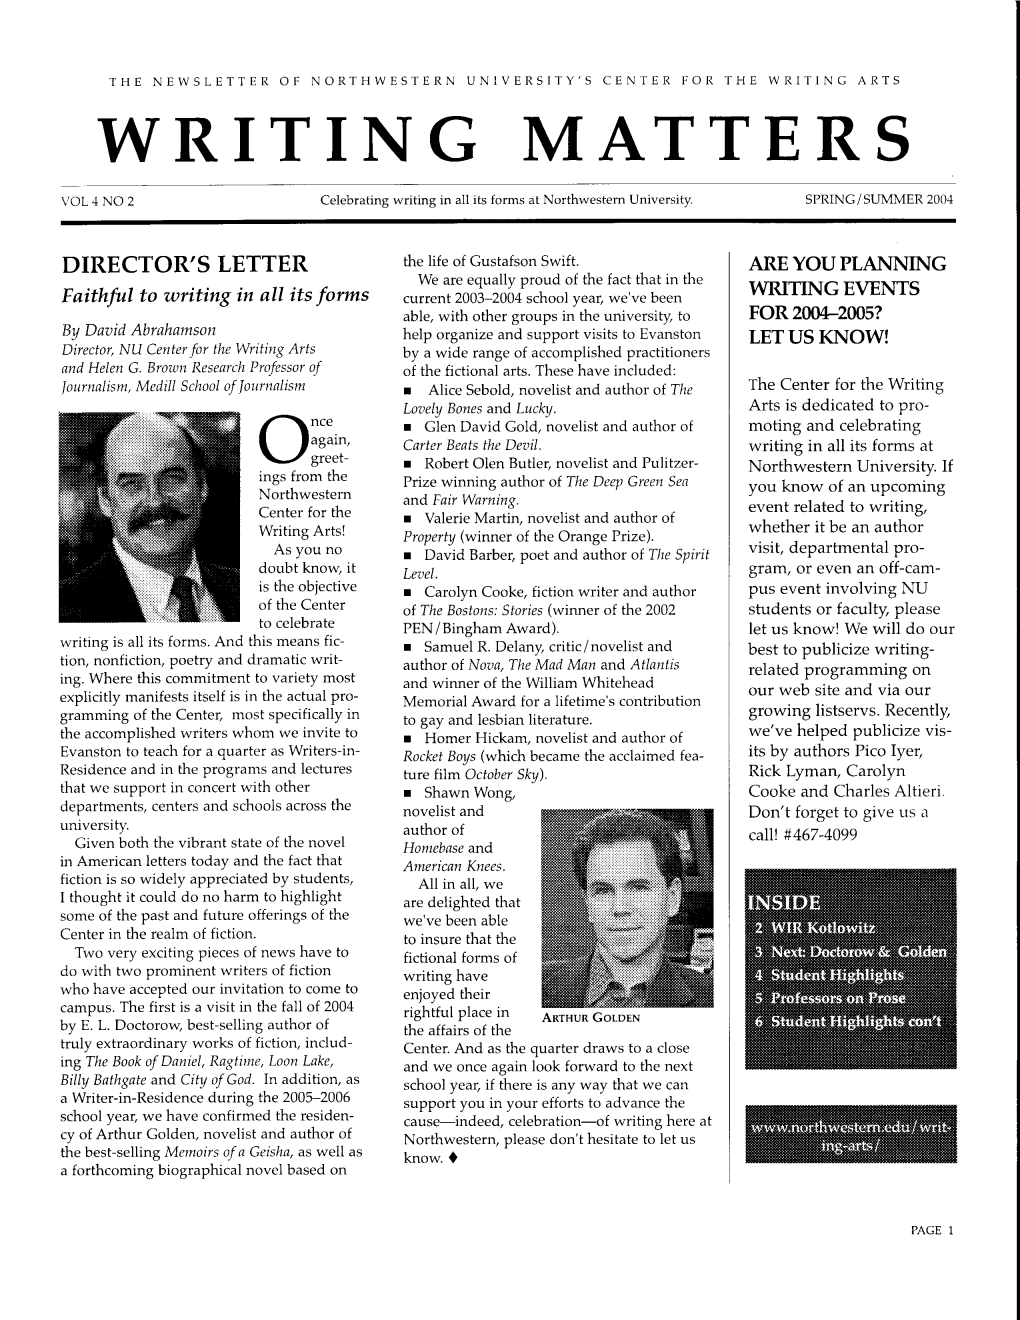 WRITING MATTERS Vol.R No 2 Celebrating Wriiing in All Its Forms at Northwestern University SPRING/SUMMER 2OO]